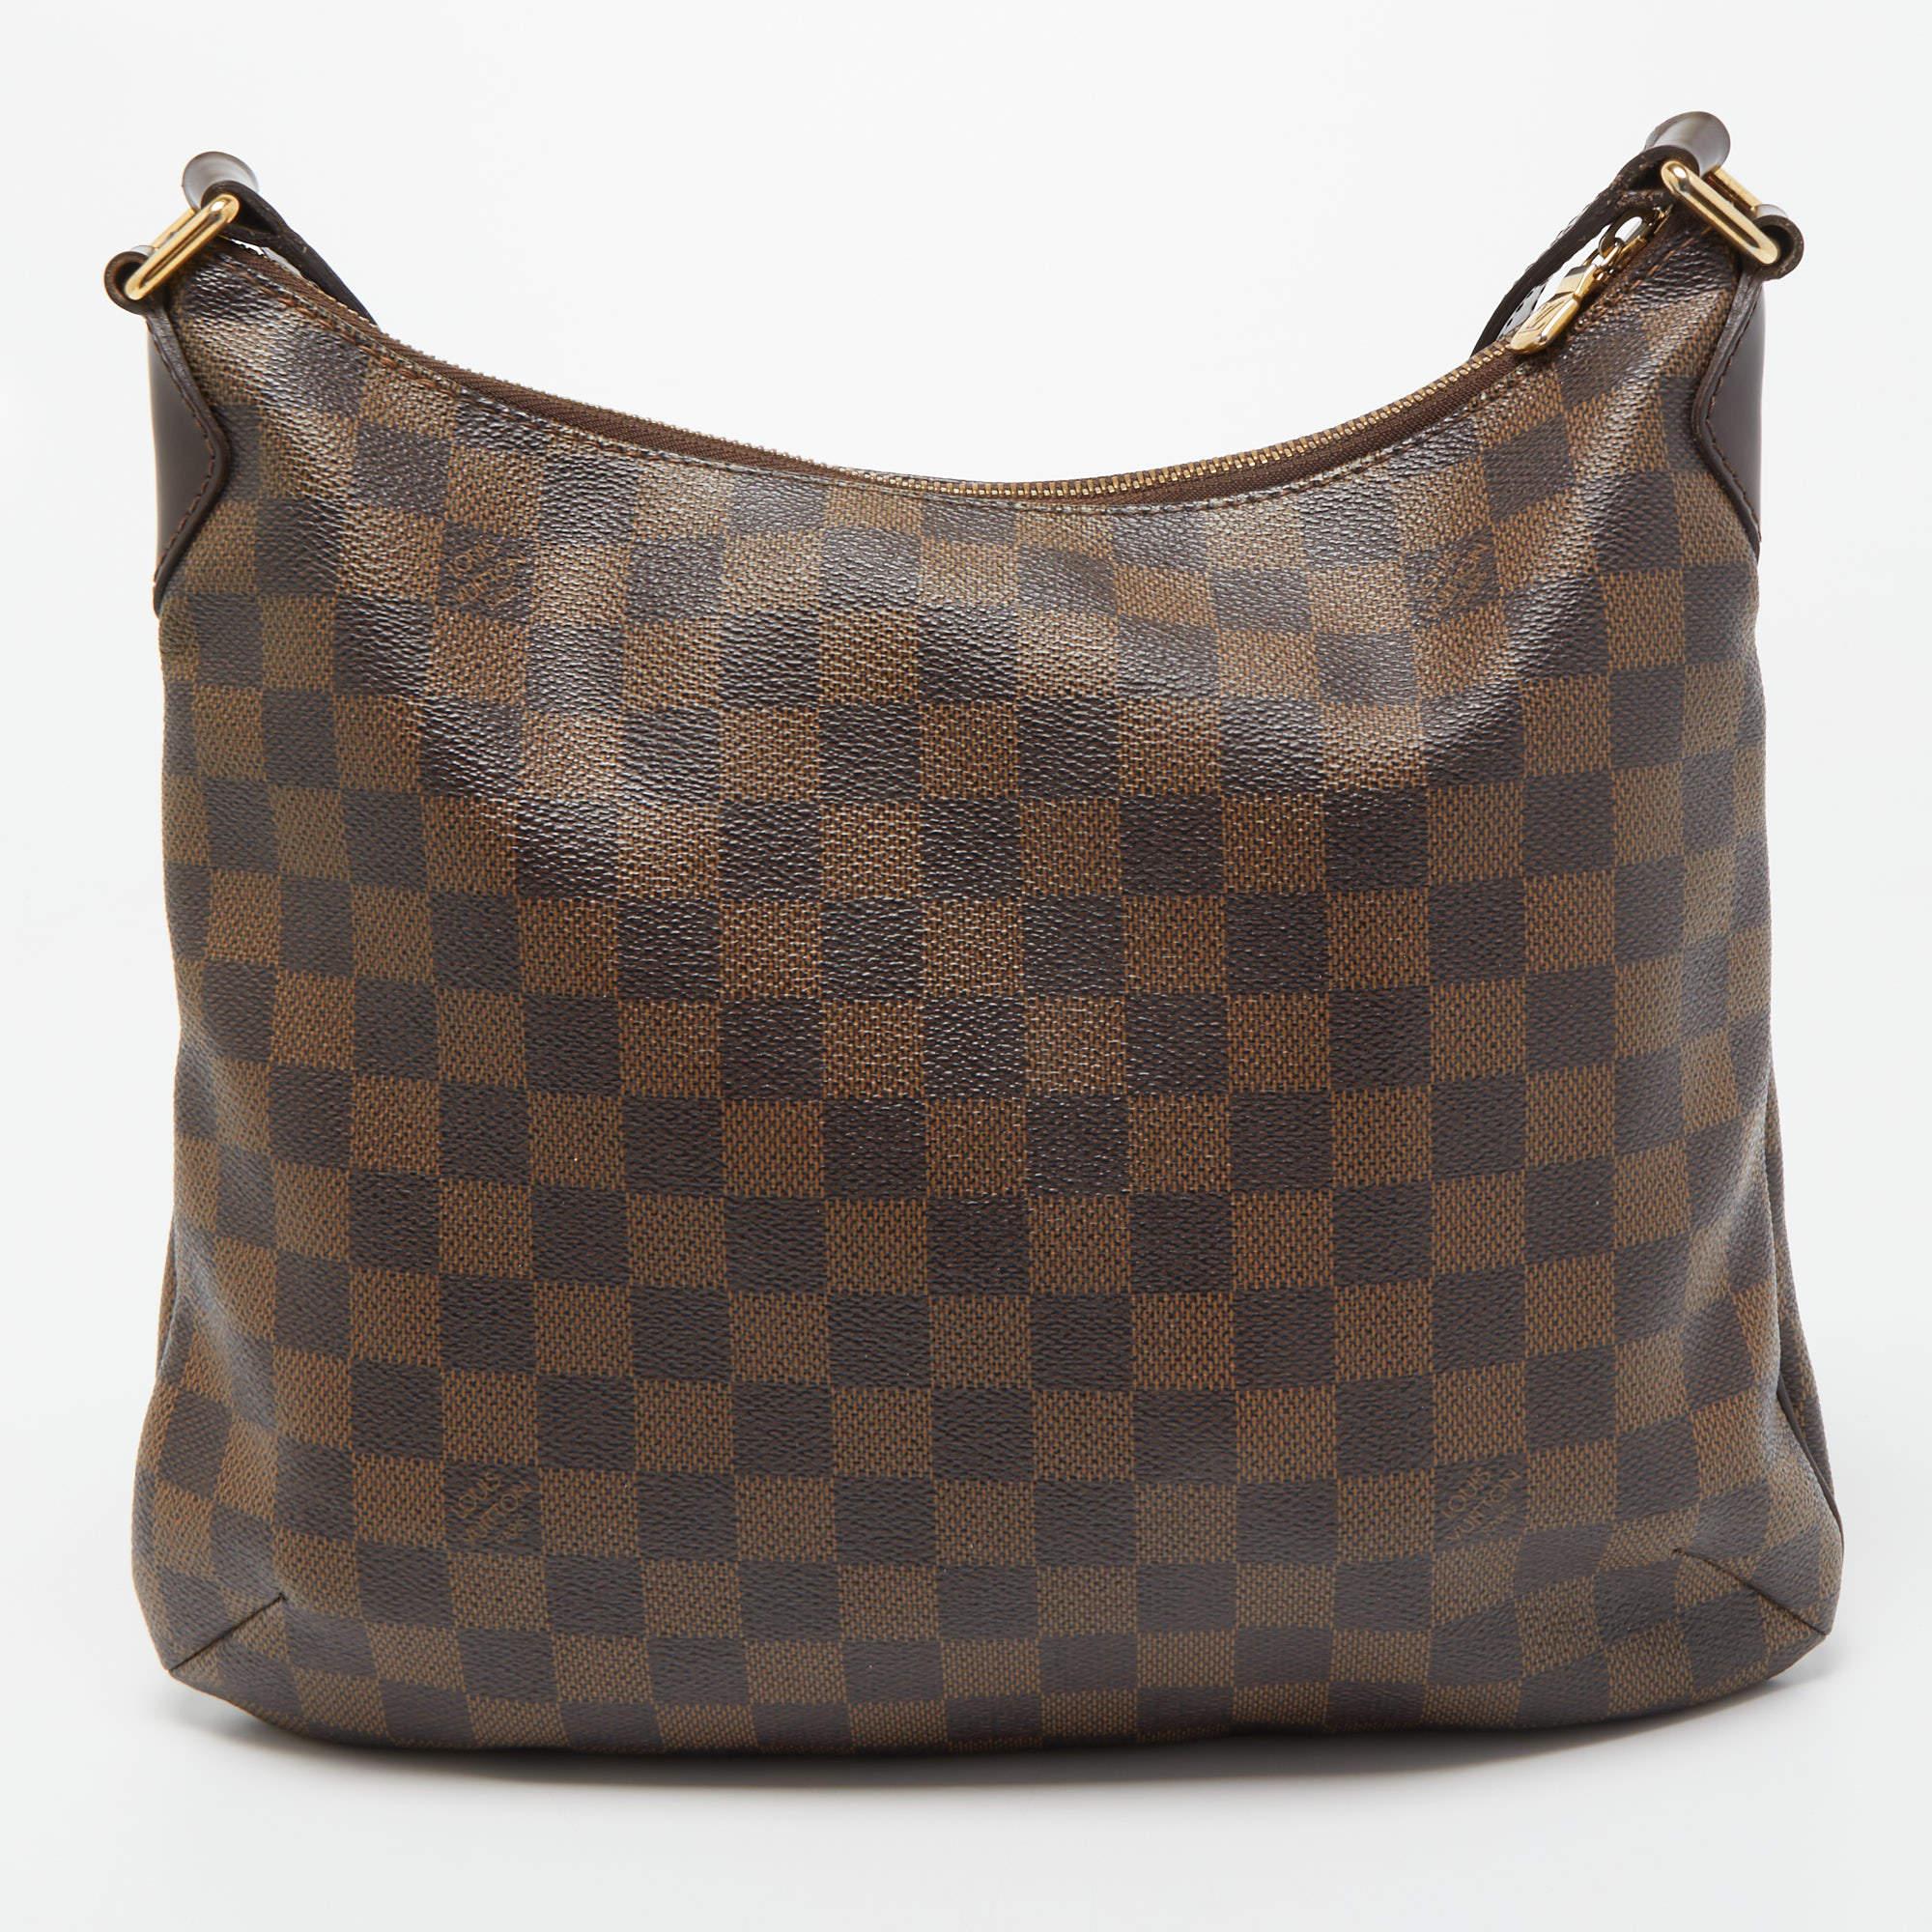 Here's a bag that you can carry at any time of the day for its practicability and charm. This Bloomsbury bag is crafted from Damier Ebene canvas and comes with minimal gold-tone hardware. It features brown leather trimming, an exterior pocket for